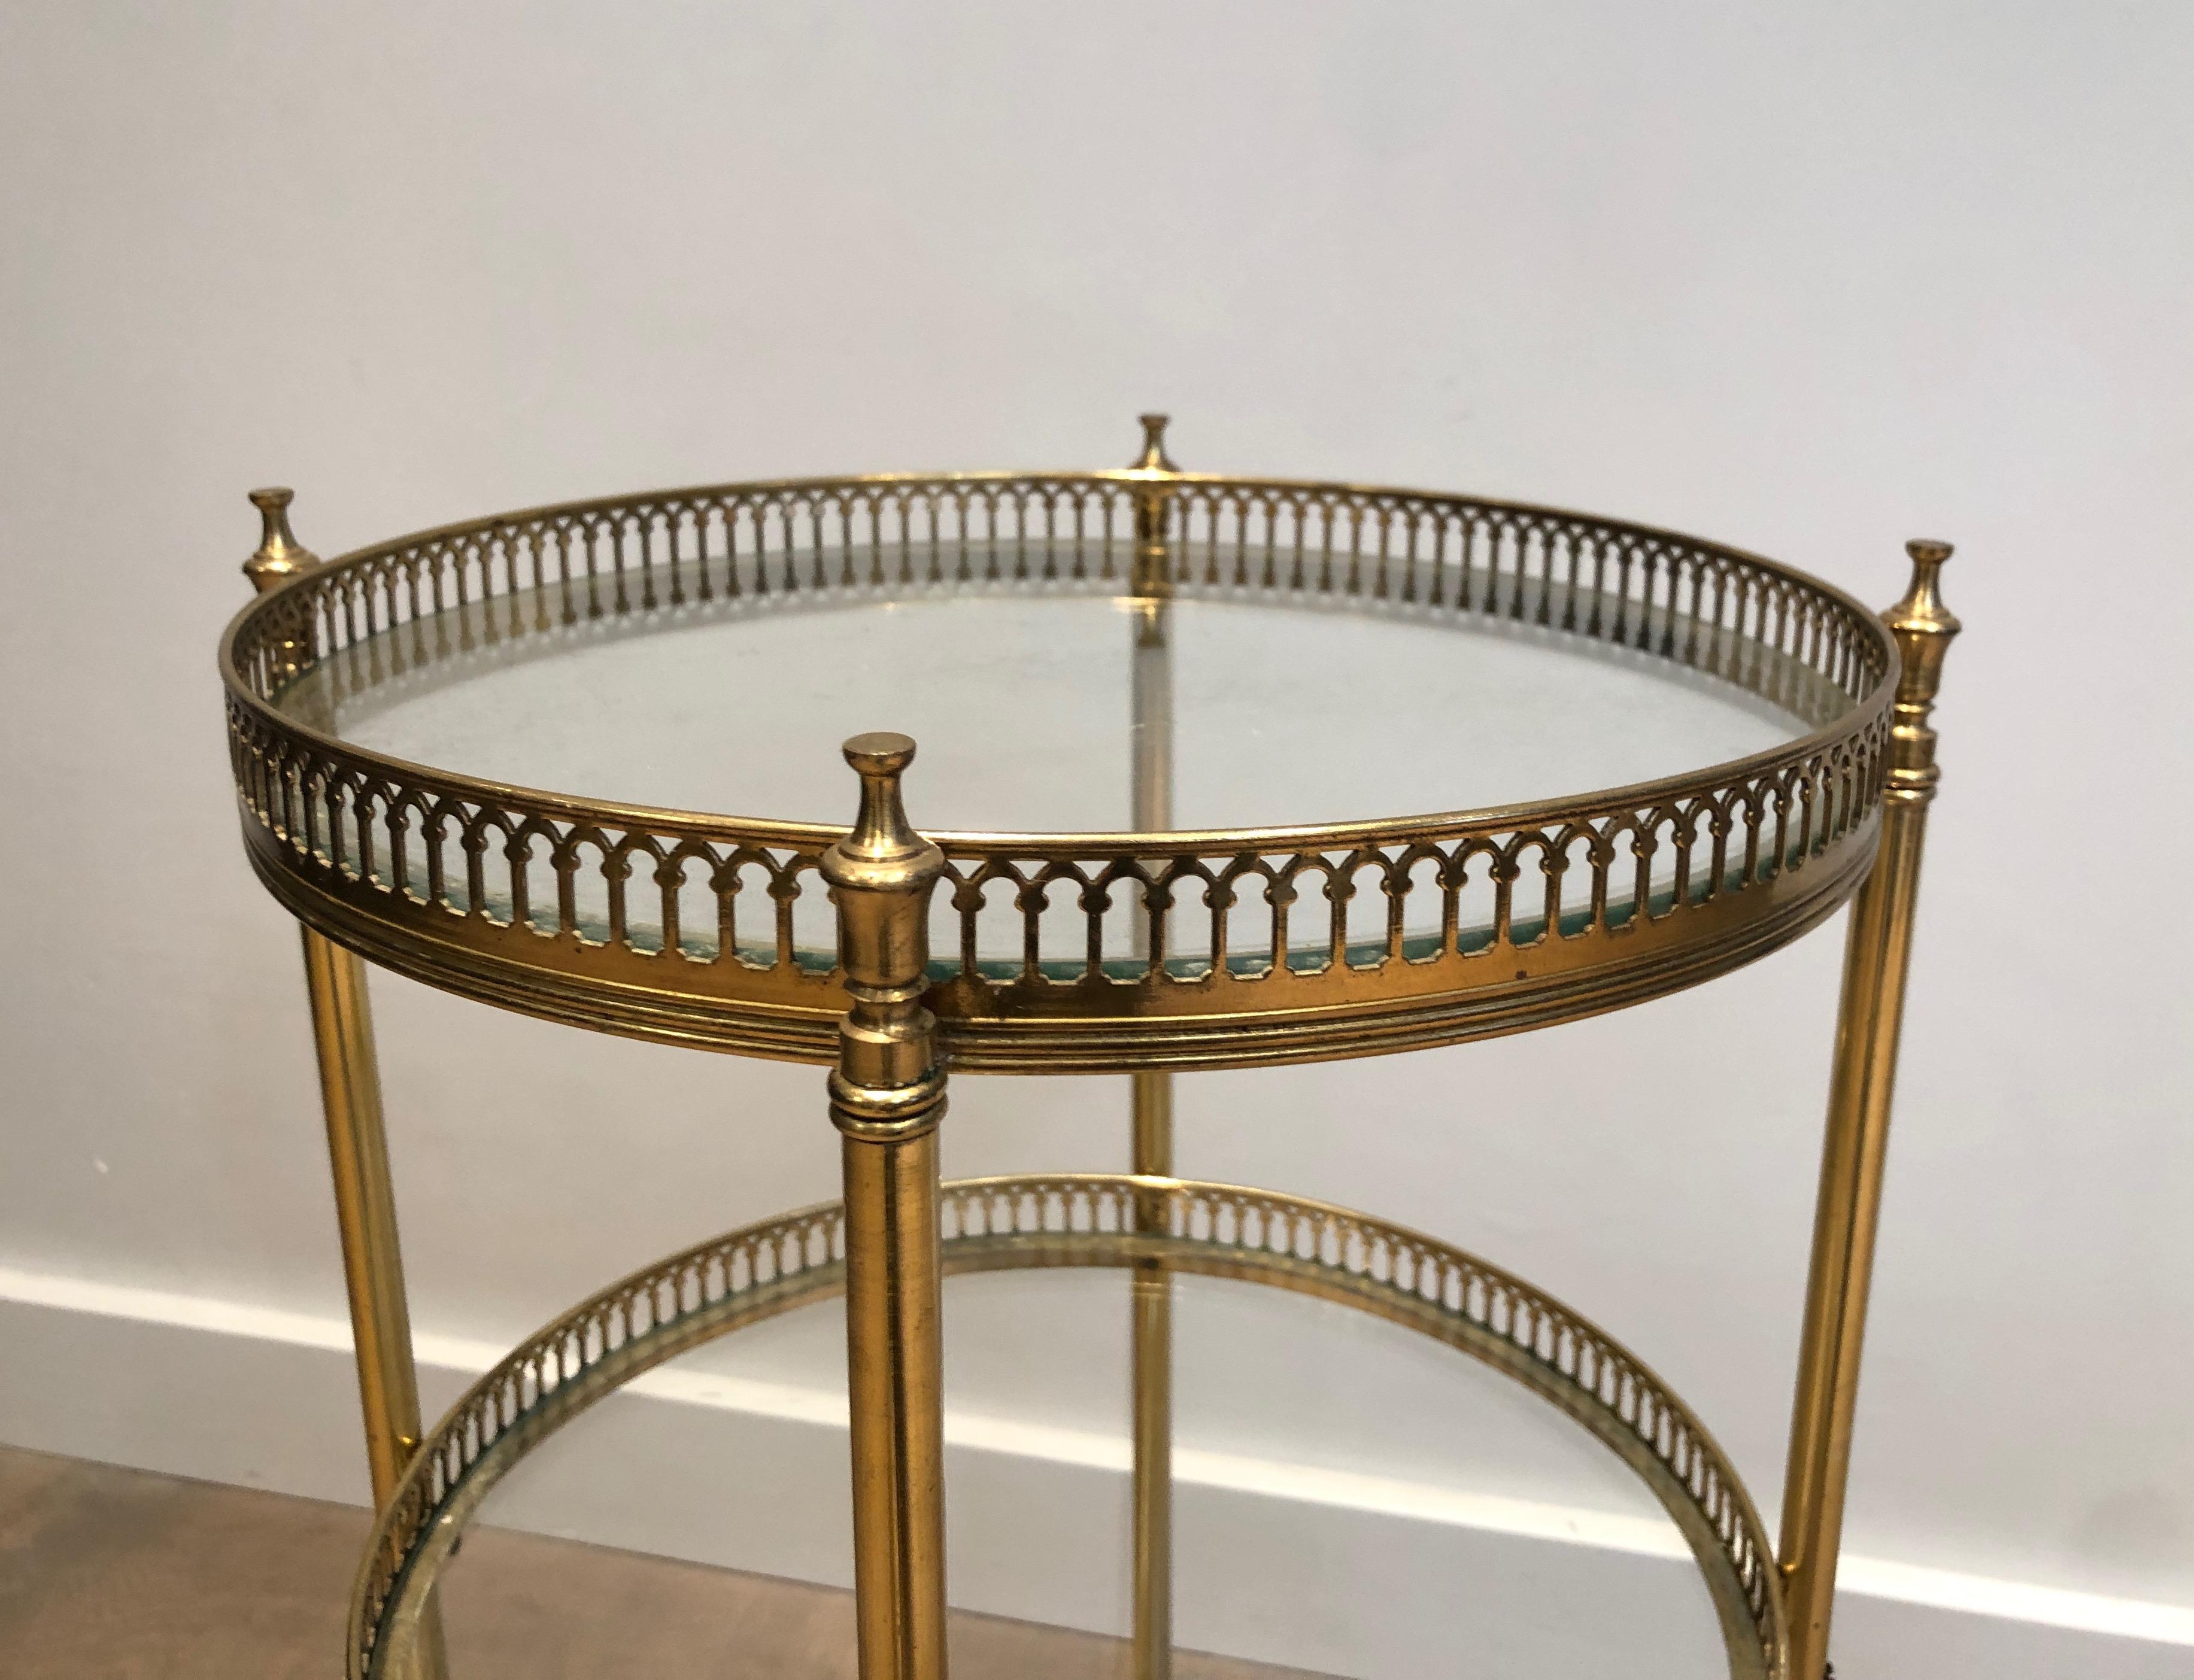 Late 20th Century Neoclassical Style Round Brass Bar Cart, Attributed to Maison Jansen